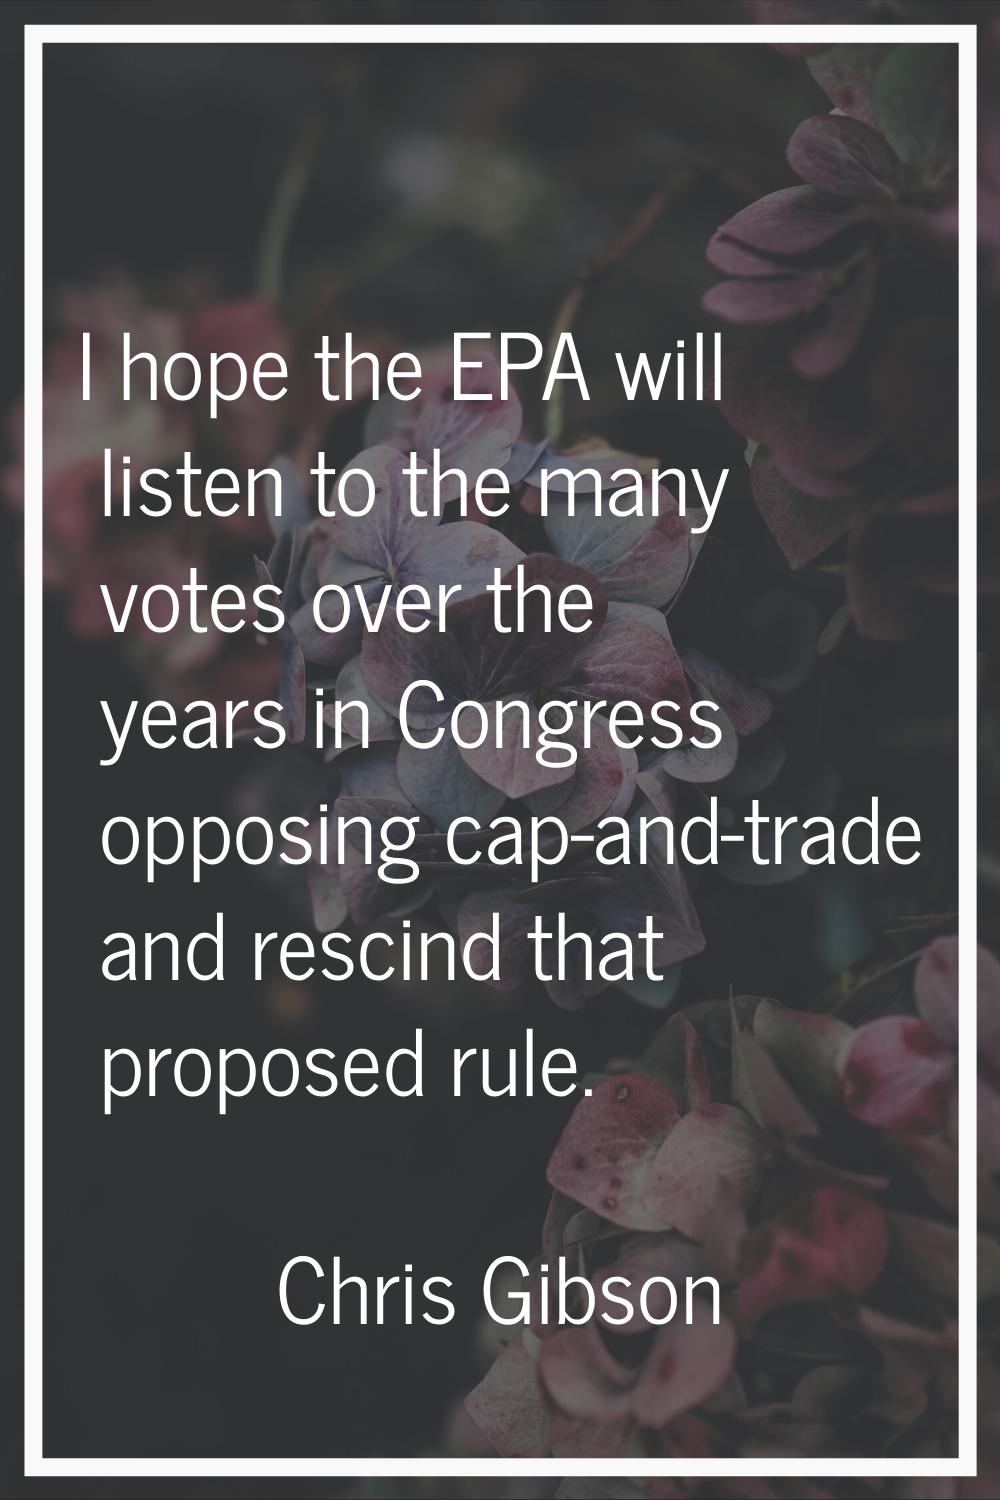 I hope the EPA will listen to the many votes over the years in Congress opposing cap-and-trade and 